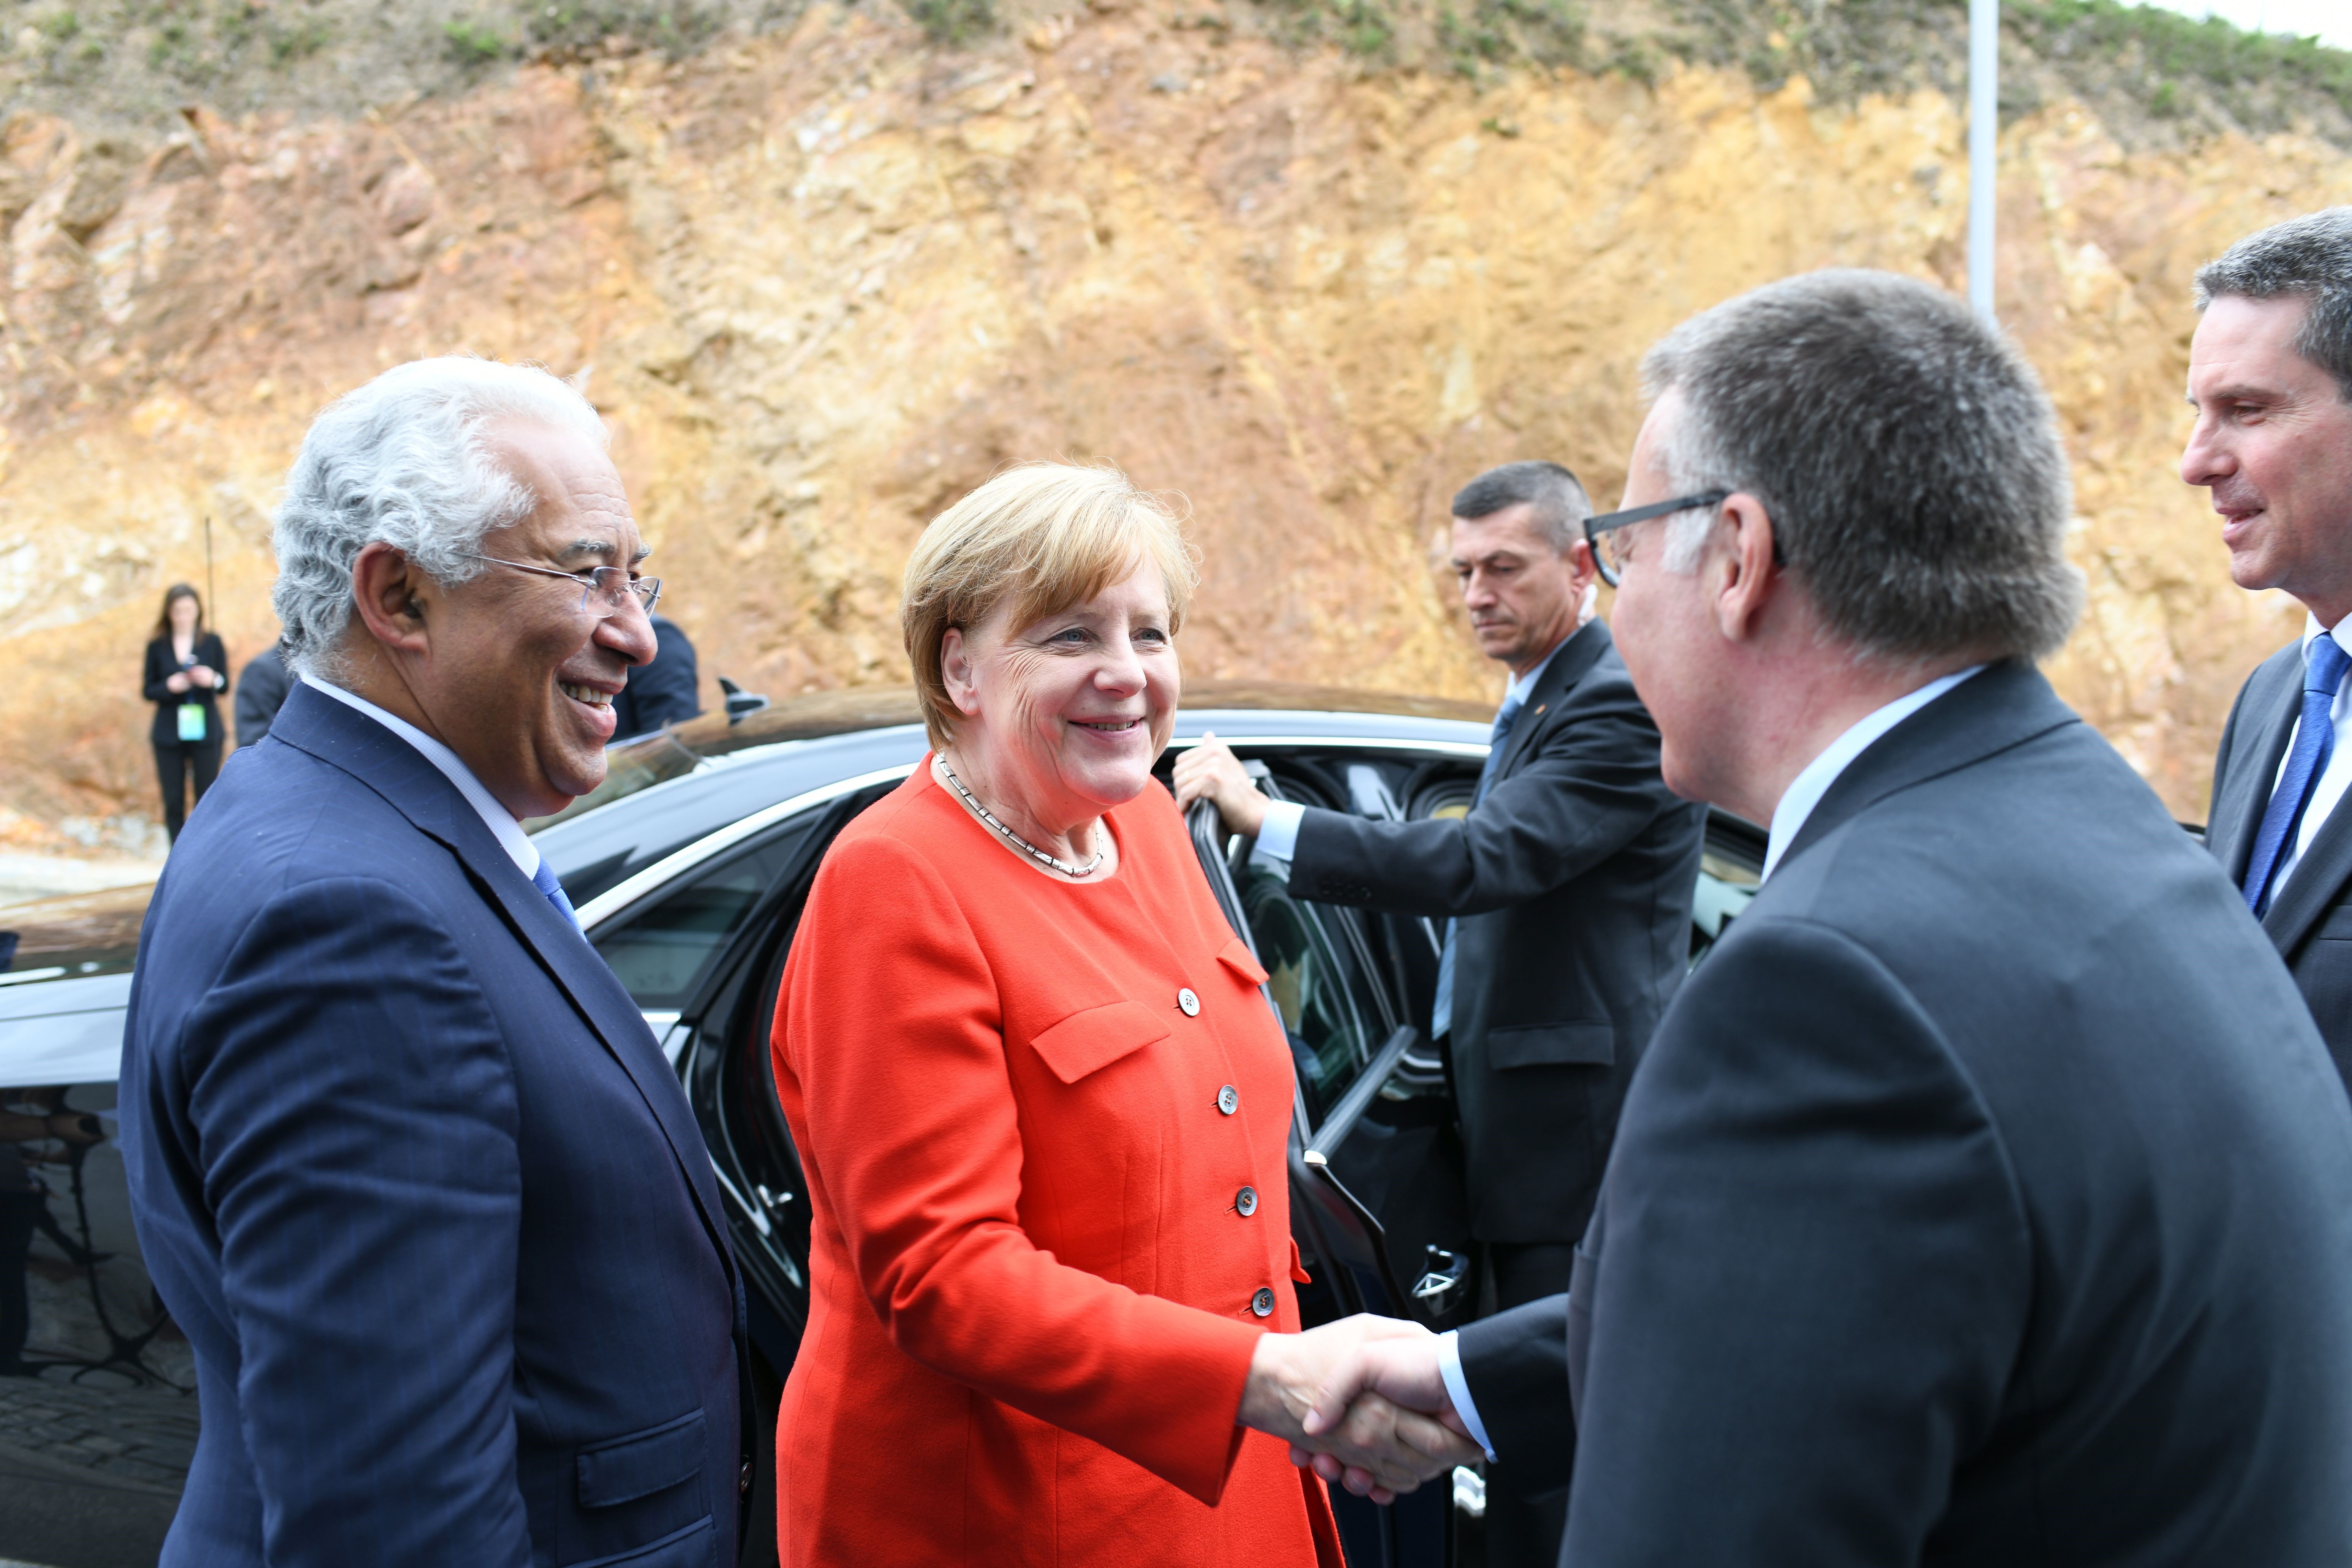 Political VIPs at Bosch: chancellor Merkel and prime minister Costa open technology center in Portugal